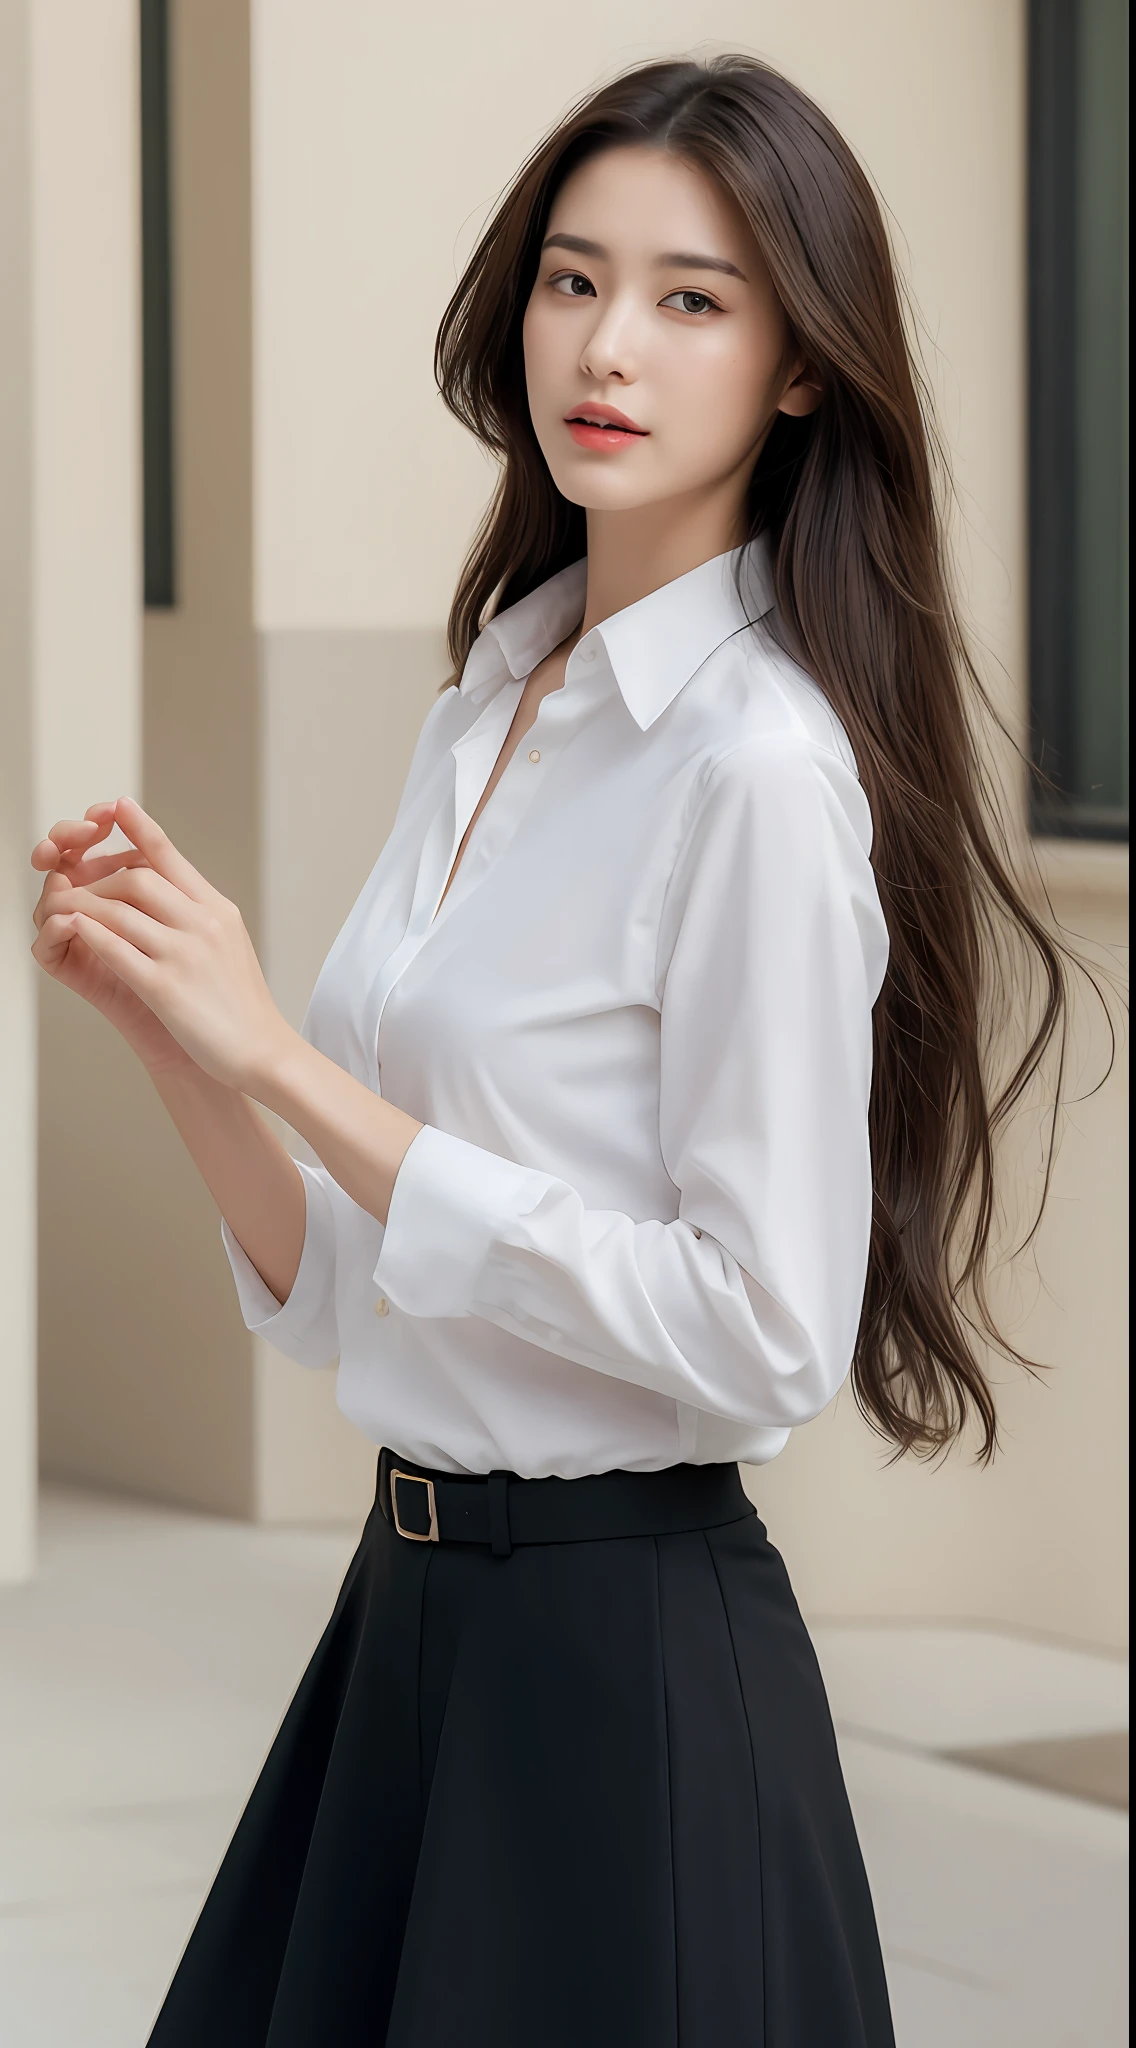 (top quality, high resolution, masterpiece: 1.3), tall and pretty woman, slender abs, dark brown hair styled with loose waves, chest, wearing pendant, white button-up shirt, belt, black skirt, (modern architecture in background), exquisitely rendered details on face and skin texture, detailed eyes, double eyelids, no bra, shirt fitted to bare skin, from above